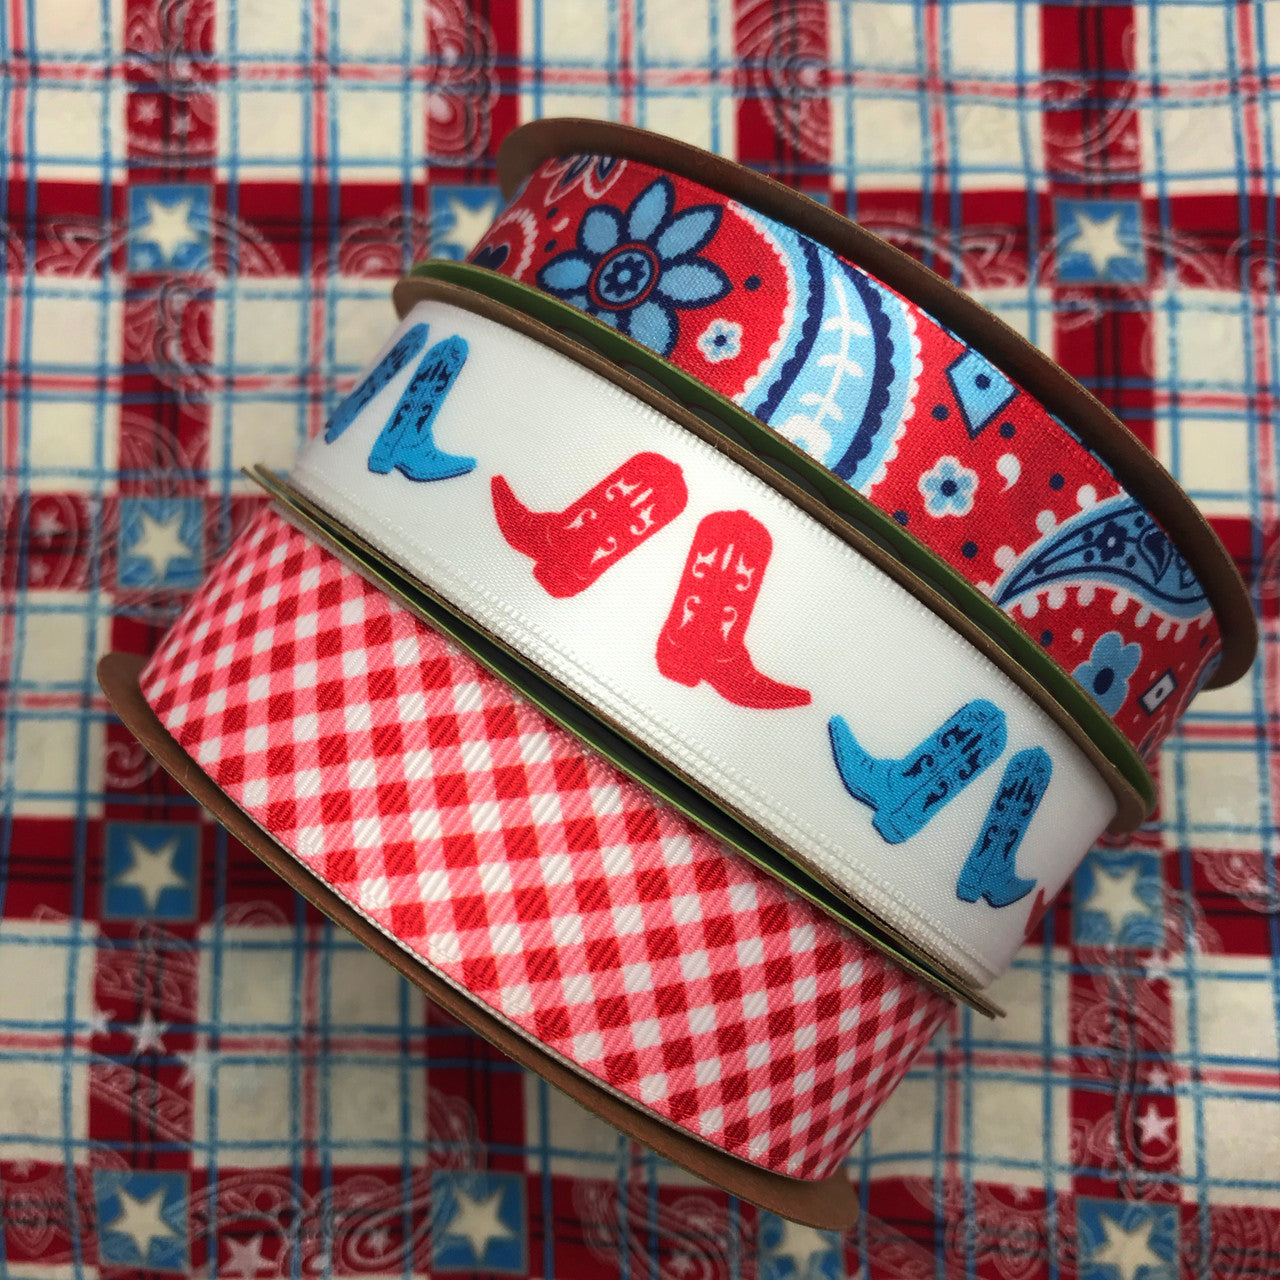 There are so many ways to mix and match our Patriotic Paisley with other ribbons! We've paired it with cowboy boots and red and white gingham for a fun country western theme!